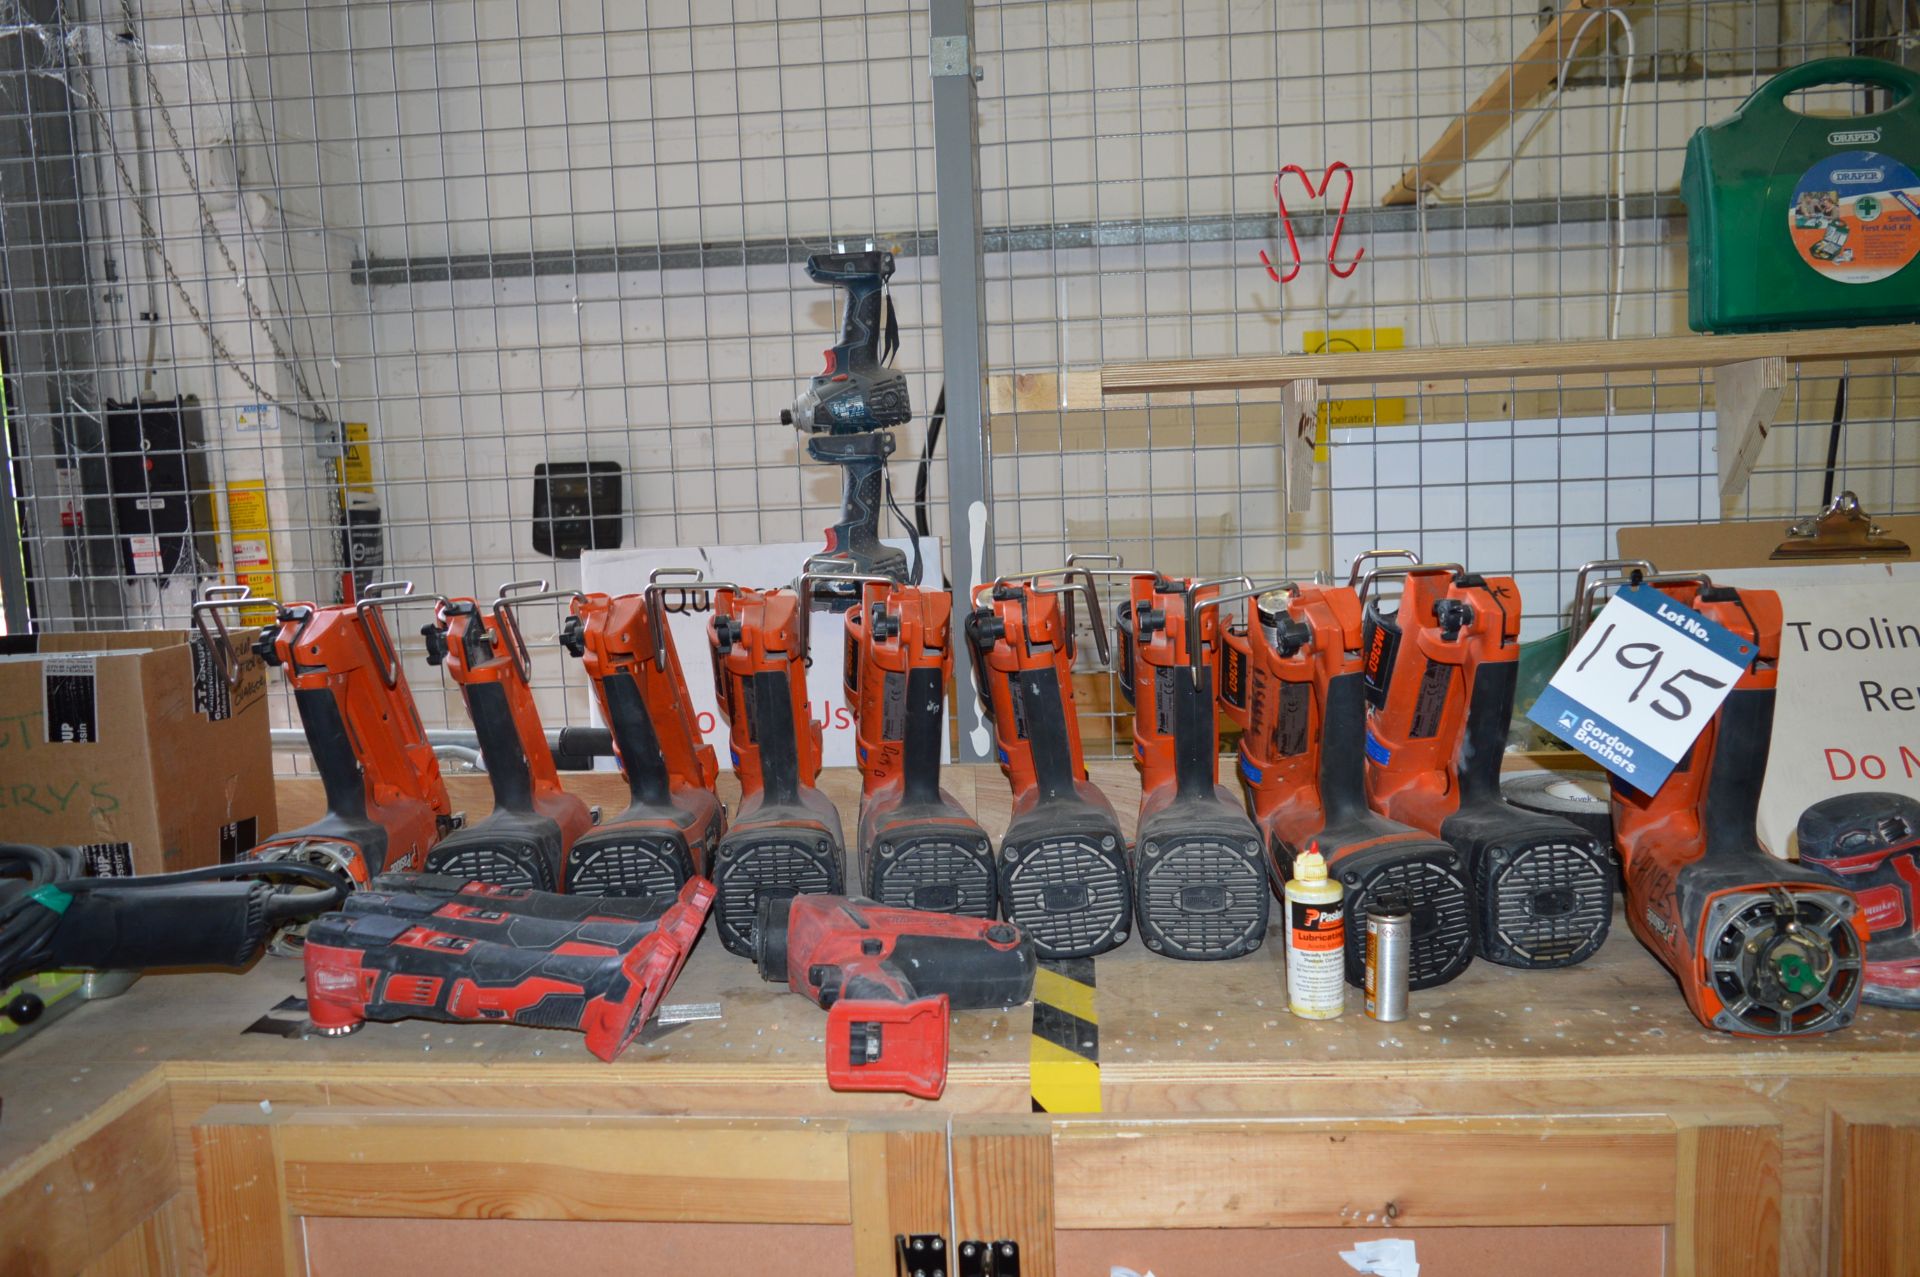 Quantity of Paslode, nail guns, 110v power tools and battery tools - all require attention (as